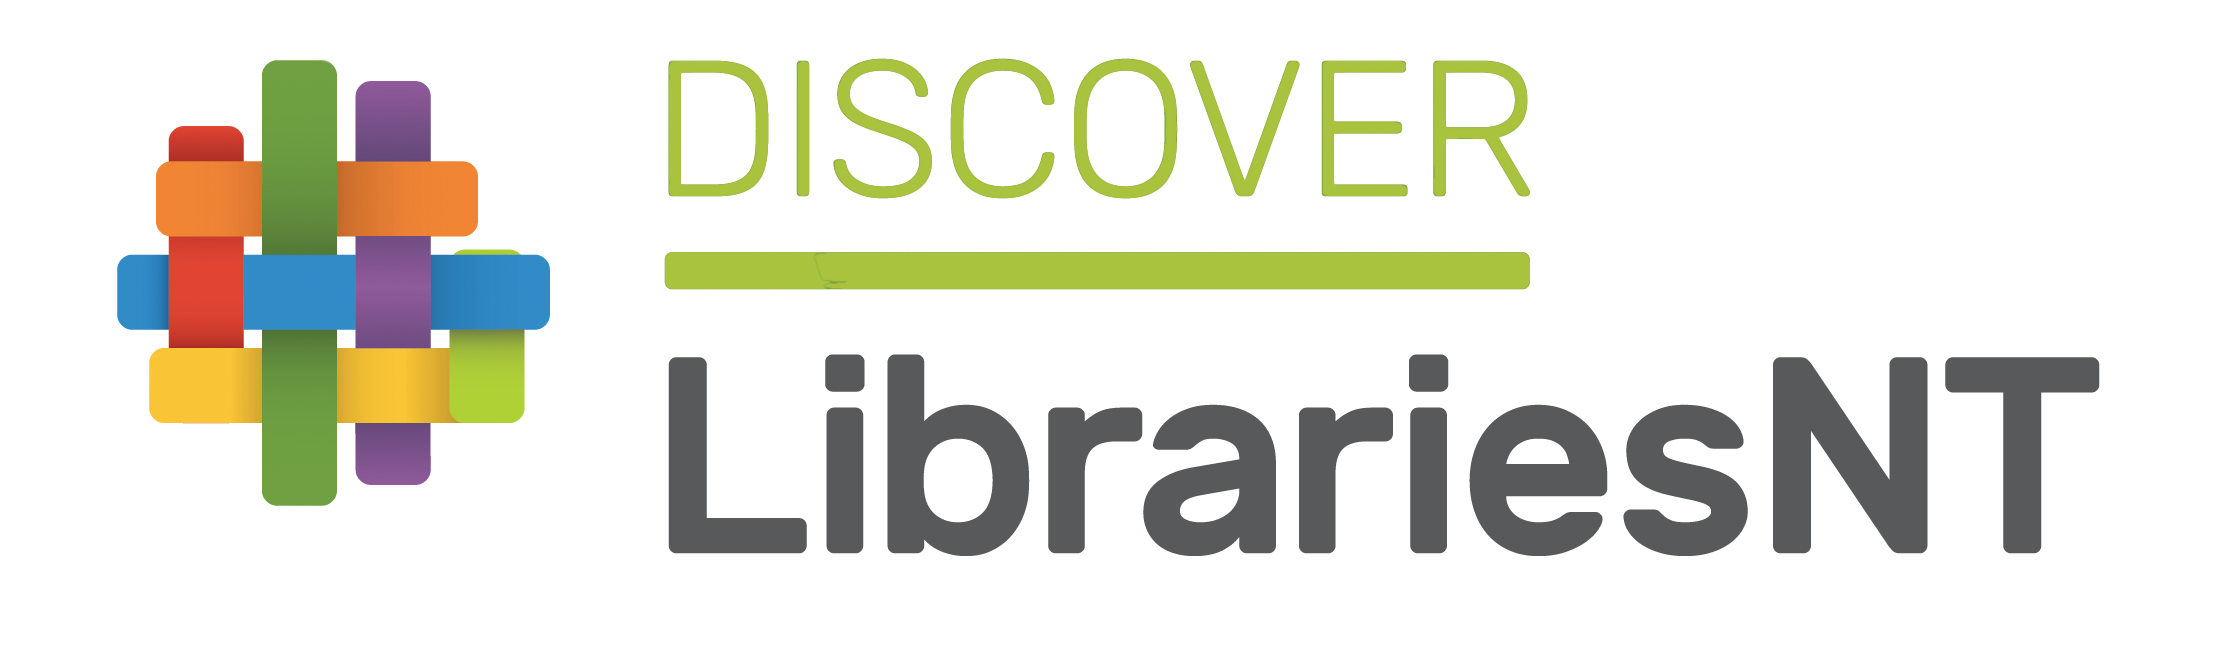 Discover LibrariesNT logo